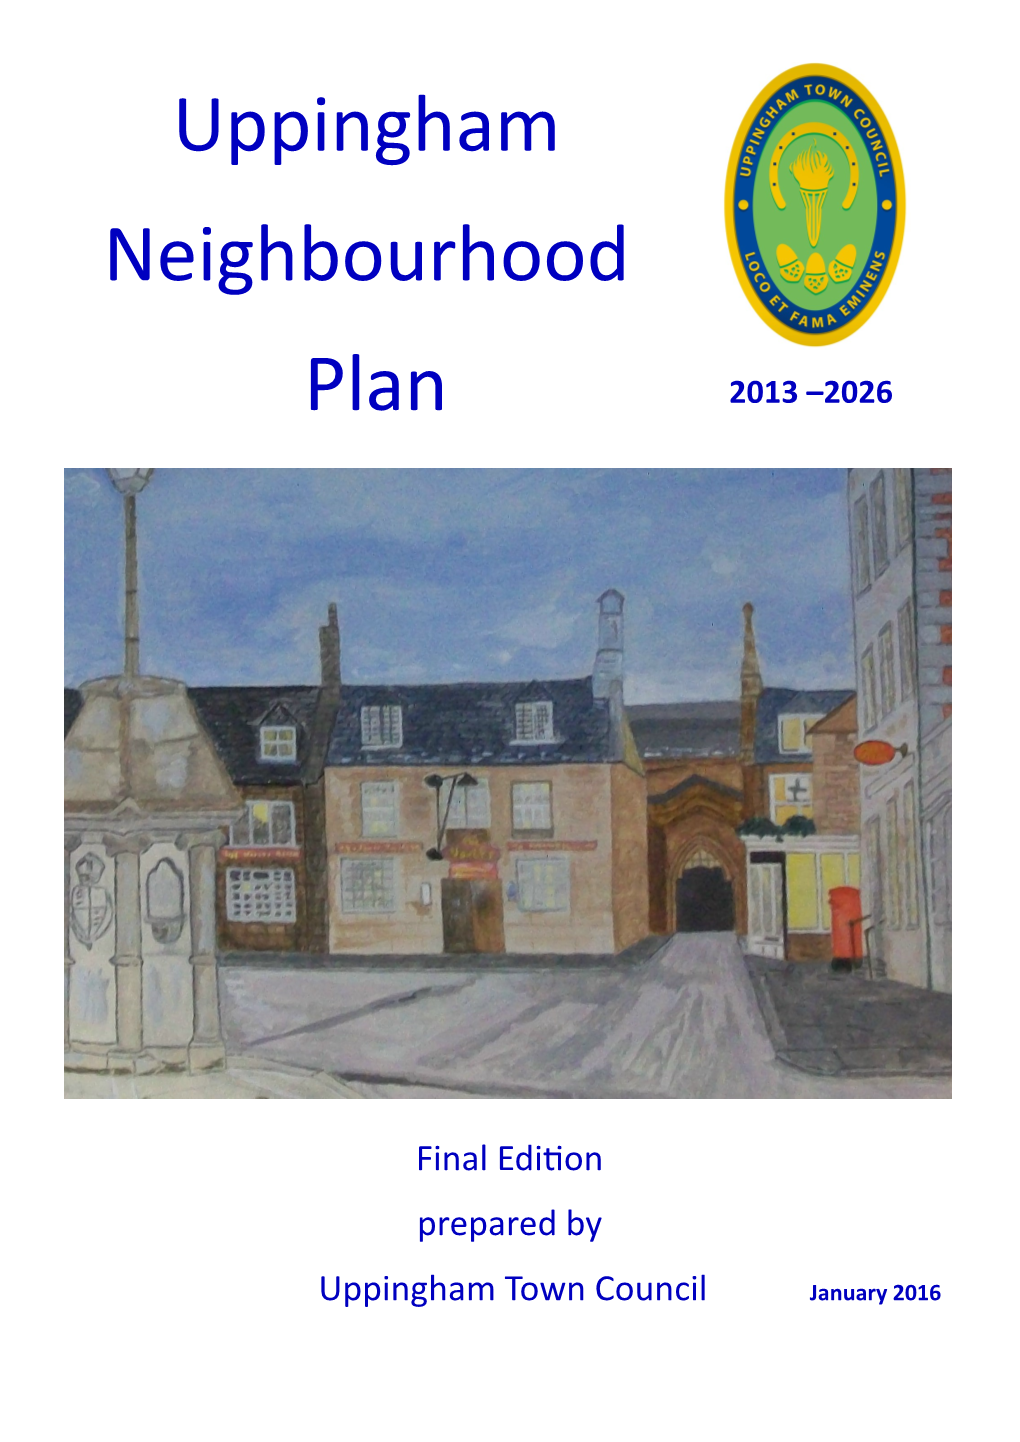 Uppingham Neighbourhood Plan Gives a Unique Opportunity for Residents and Businesses to Influence the Development of the Town Over the Next Ten Years